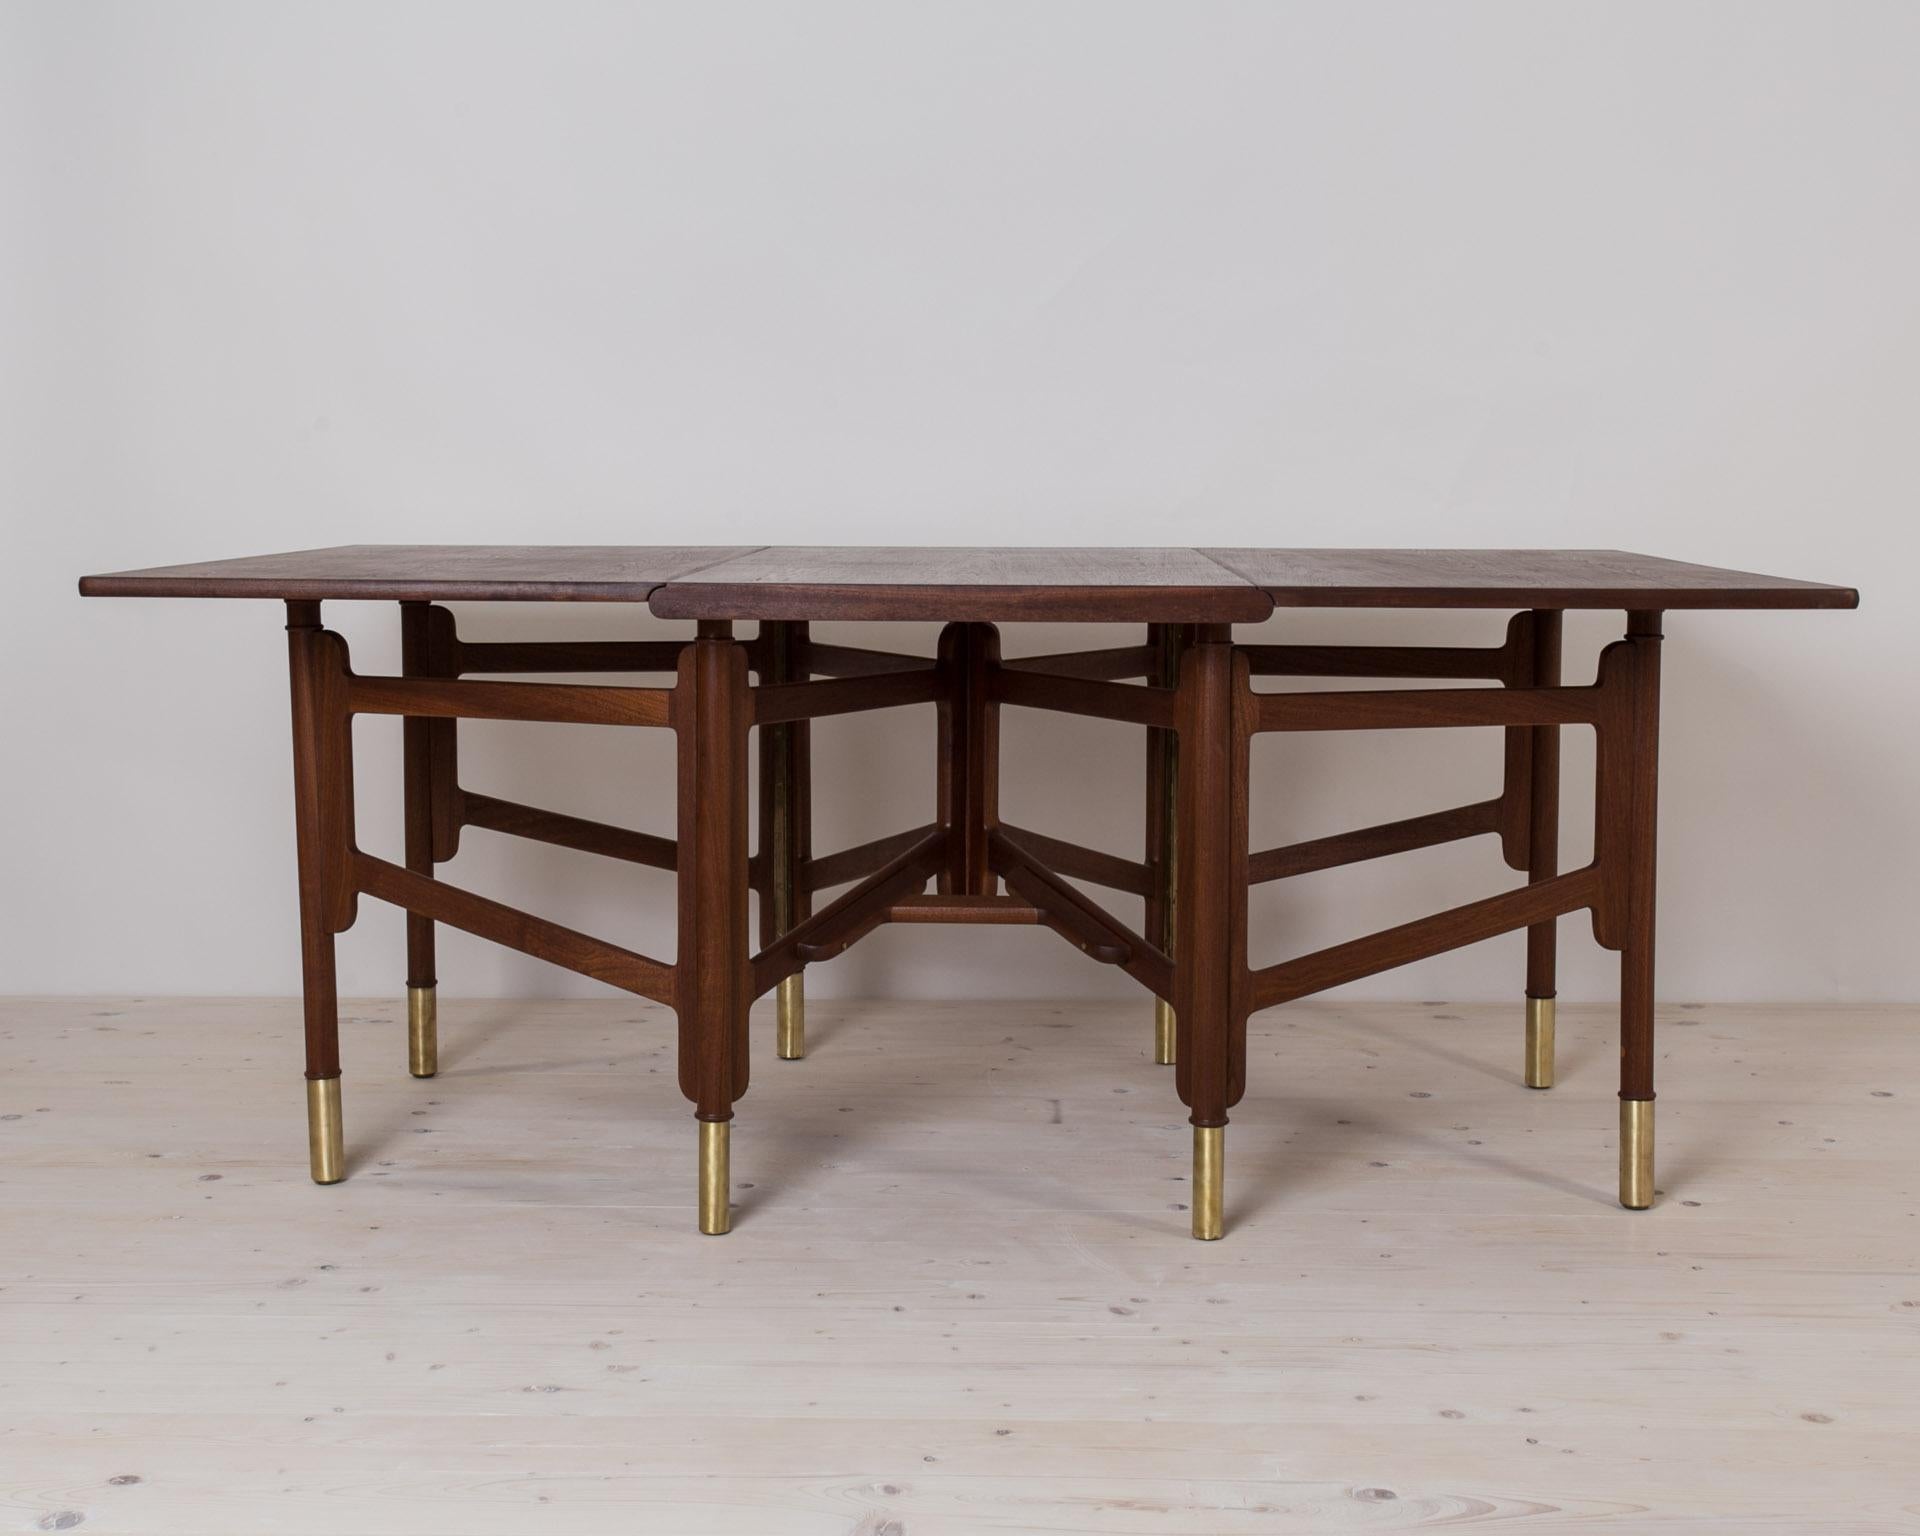 This gorgeous table was made in 1950s by Norwegian company Hiorth and Ostlyngen. Some suspect that famous Alf Sture might have been somehow involved in designing this table, but there is no officially documented confirmation so far. Neatly designed